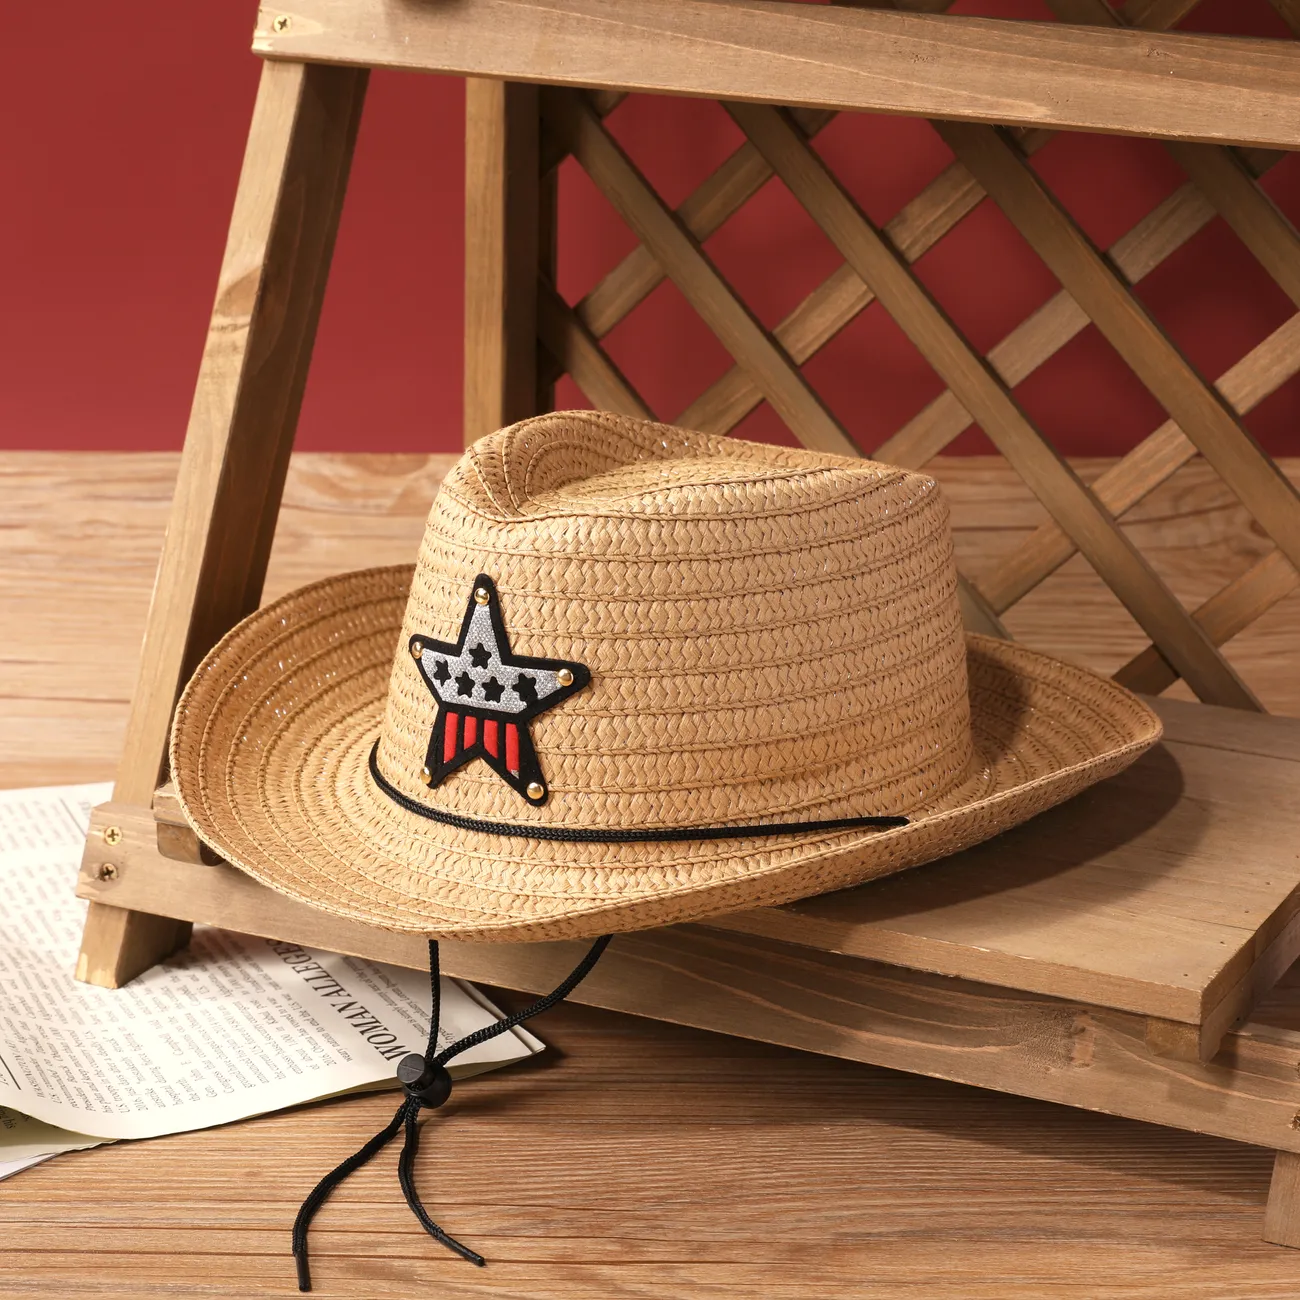 Western Cowboy Children's Sun Hat for Girls and Boys with Straw Weave, Five-Pointed Star Accent Khaki big image 1